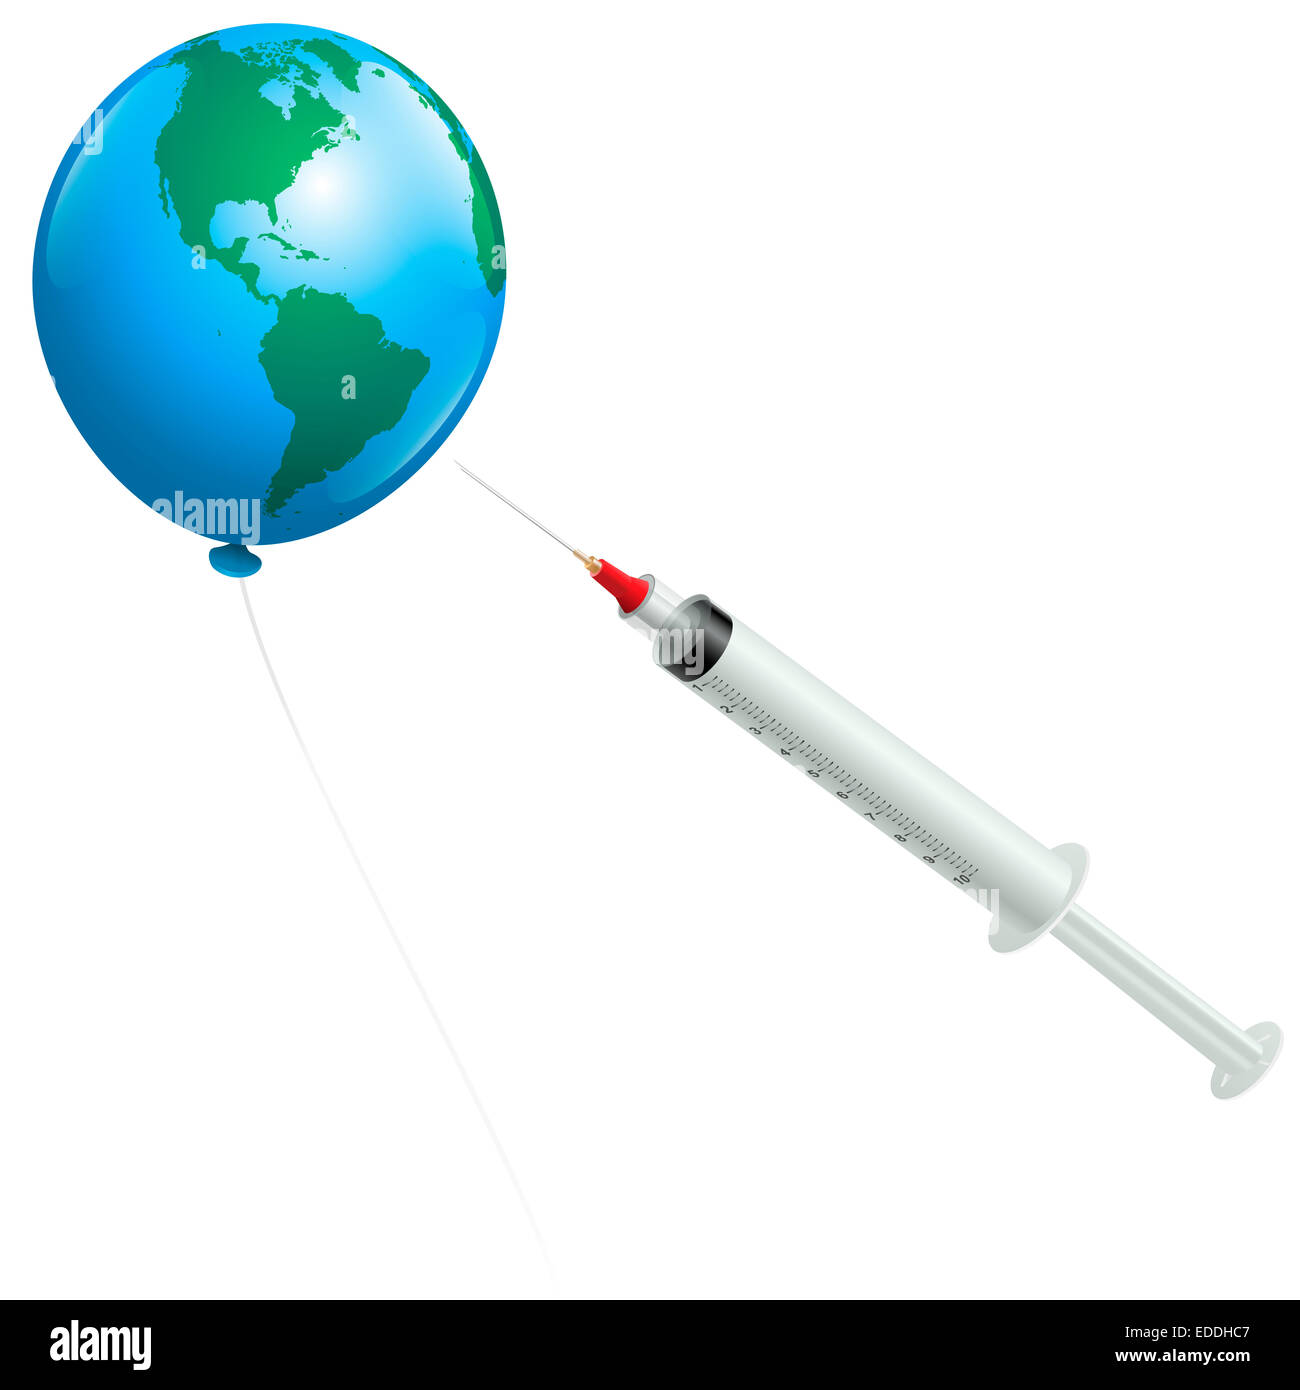 A syringe and a planet earth balloon as a symbol for pandemic disease vaccination problems. Stock Photo